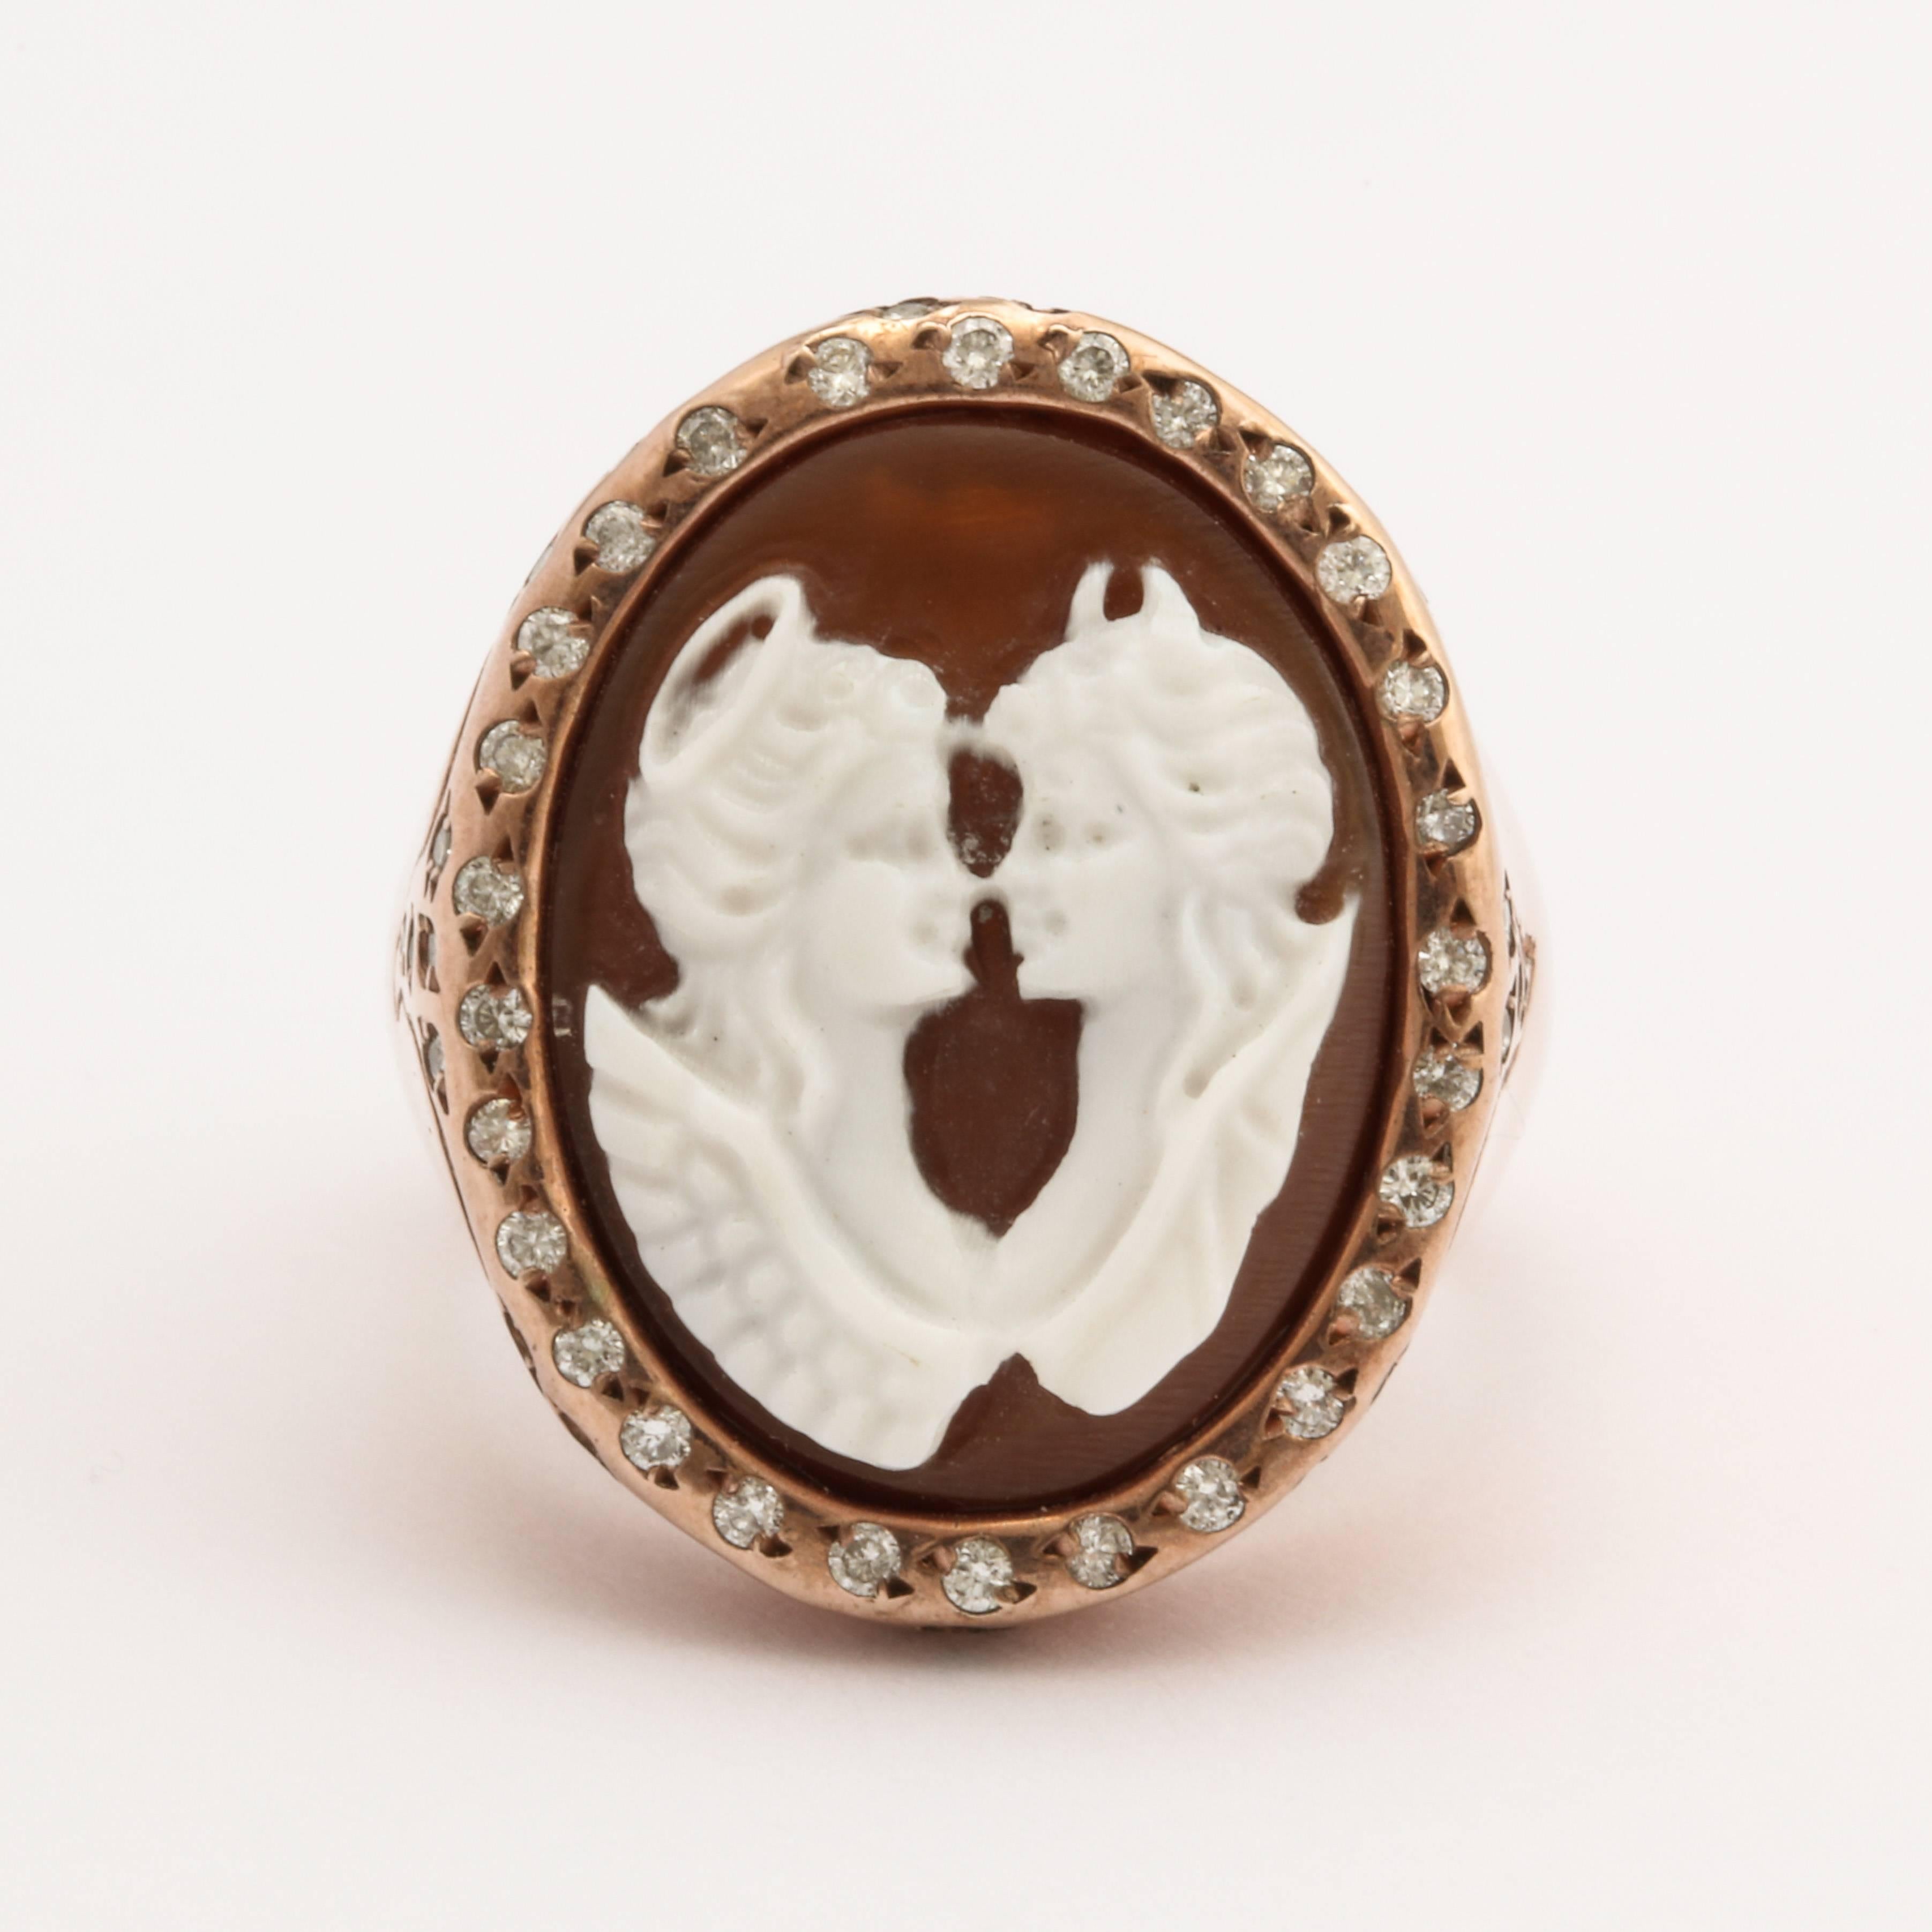 20mm sardonyx shell cameo hand-carved set in sterling silver rose rhodium plated and white diamonds.
Ring Size: 7 US

*Being these are hand crafted one of a kind designs, not all ring sizes might be immediately available. We offer custom sizing free